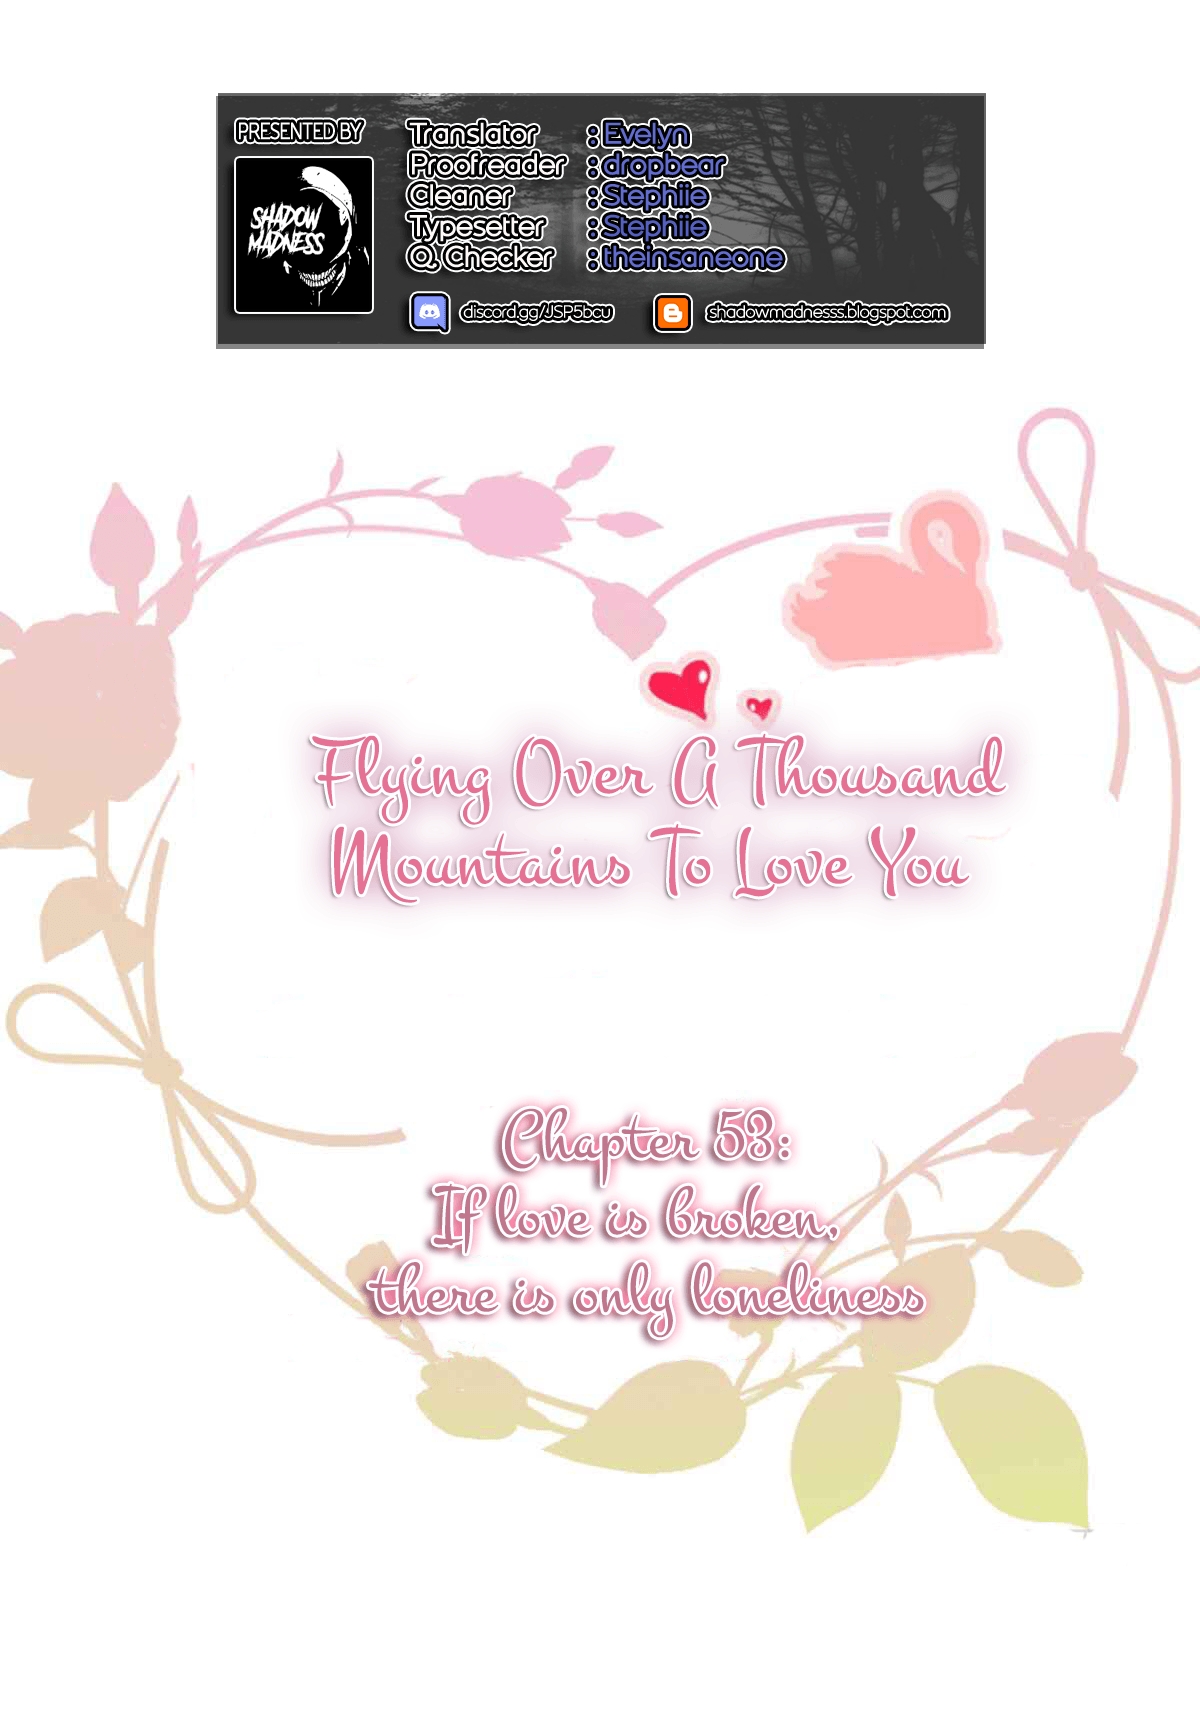 Flying Over a Thousand Mountains to Love You Ch. 53 If love is broken, there is only loneliness